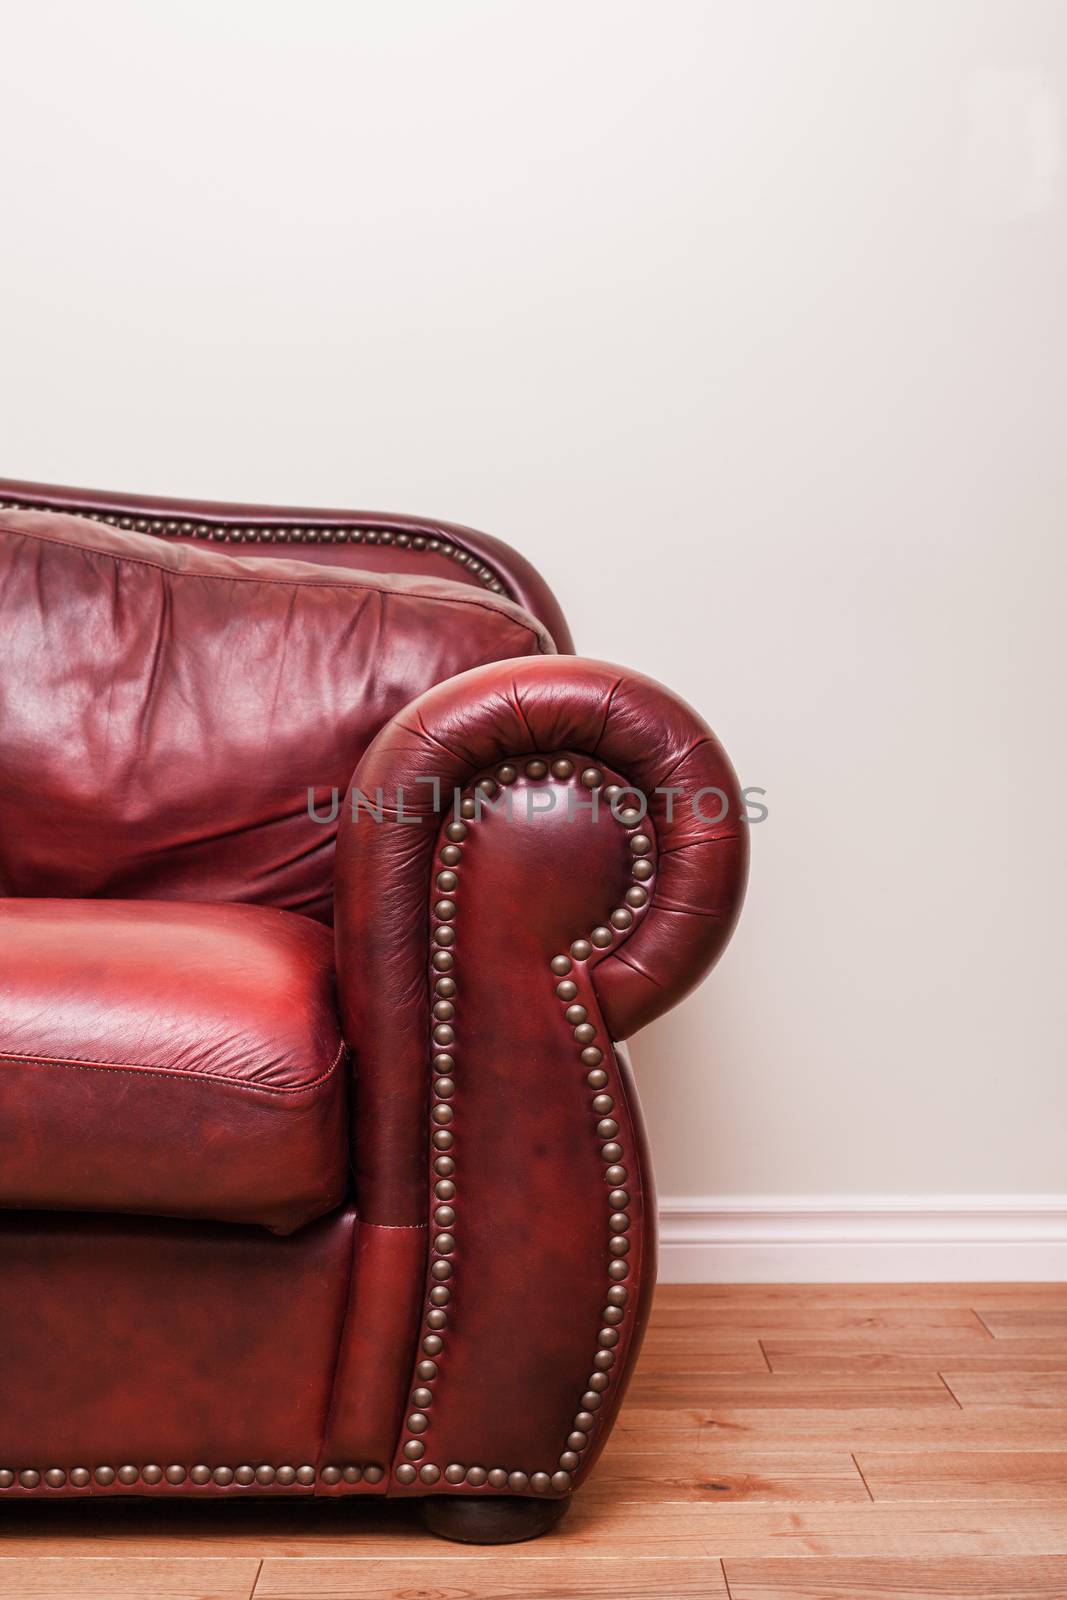 Luxurious Red Leather Couch Detail in front of a blank wall to ad your text, logo, images, etc.